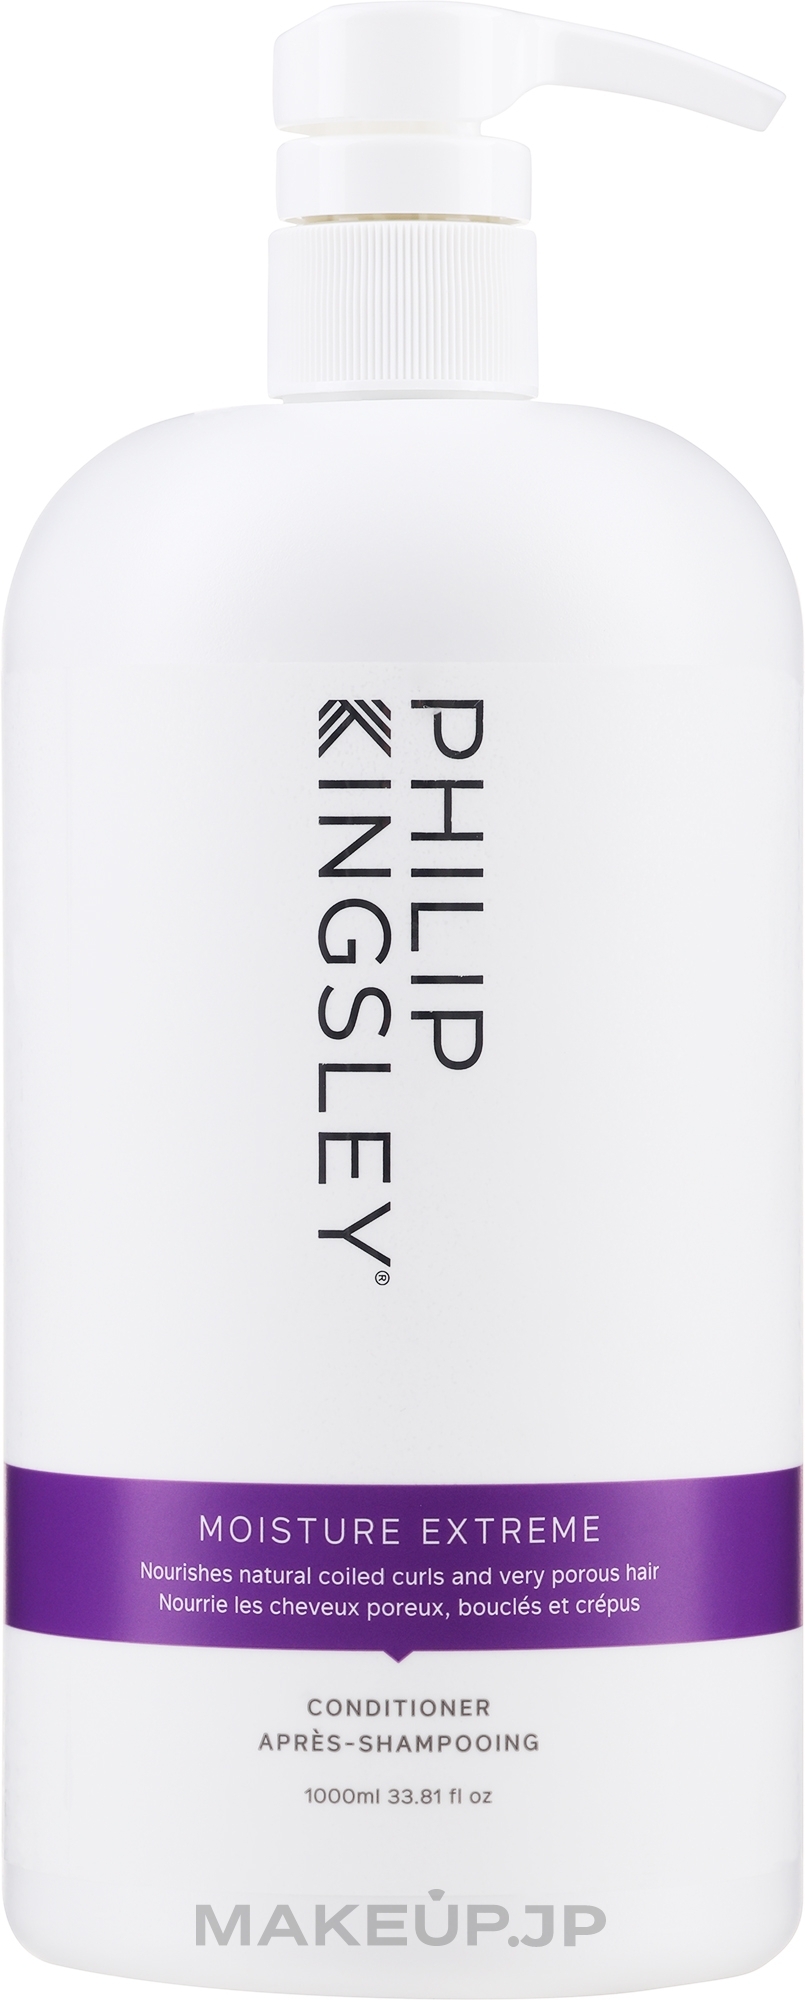 Extreme Hydration Conditioner - Philip Kingsley Moisture Extreme Conditioner — photo 1000 ml